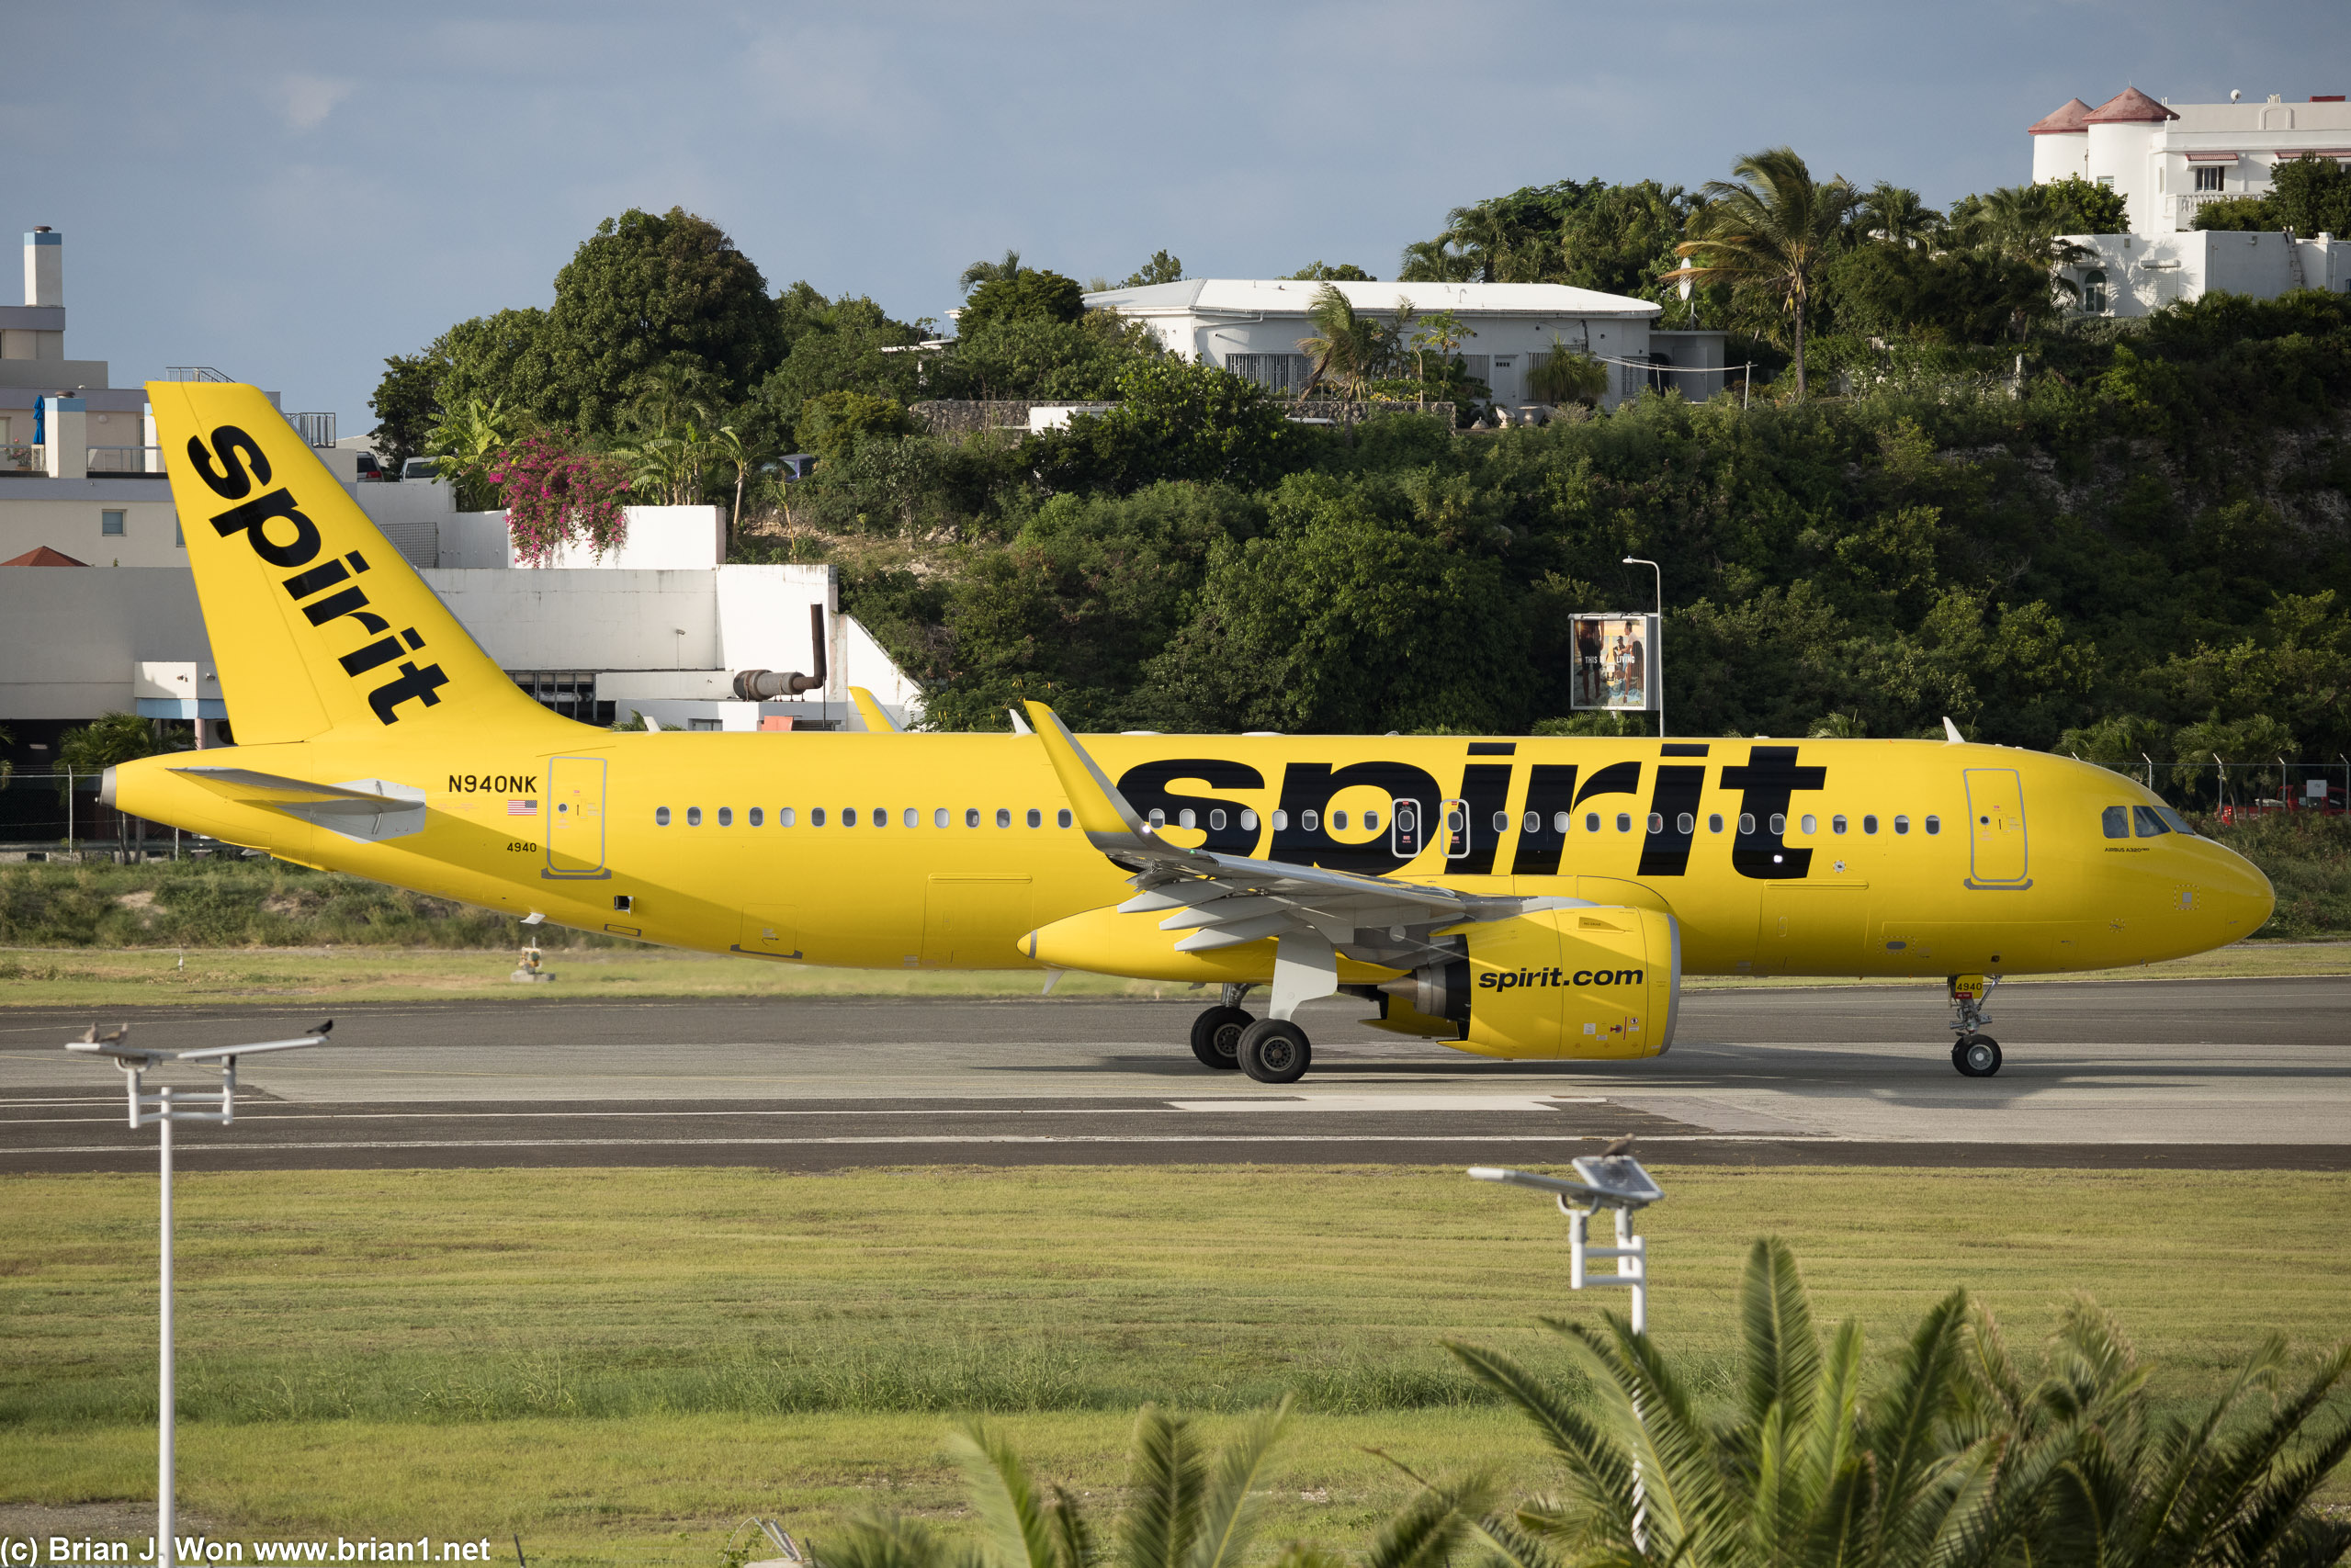 Spirit Airlines A320neo ready for take-off.